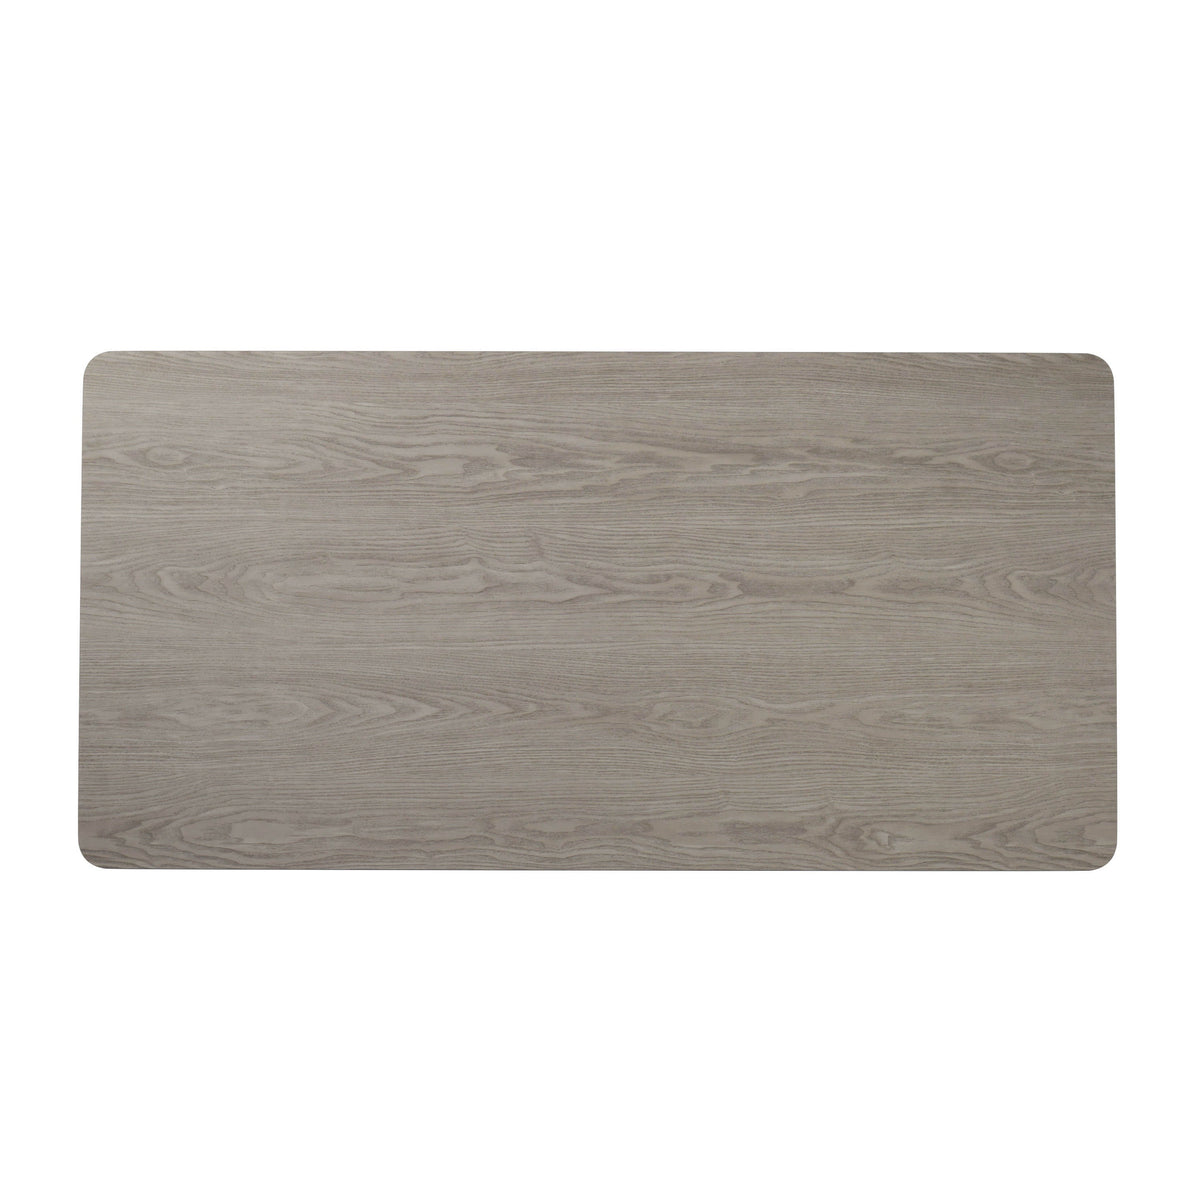 White/Gray |#| 30inch x 60inch Table Top with White or Gray Reversible Laminate Top